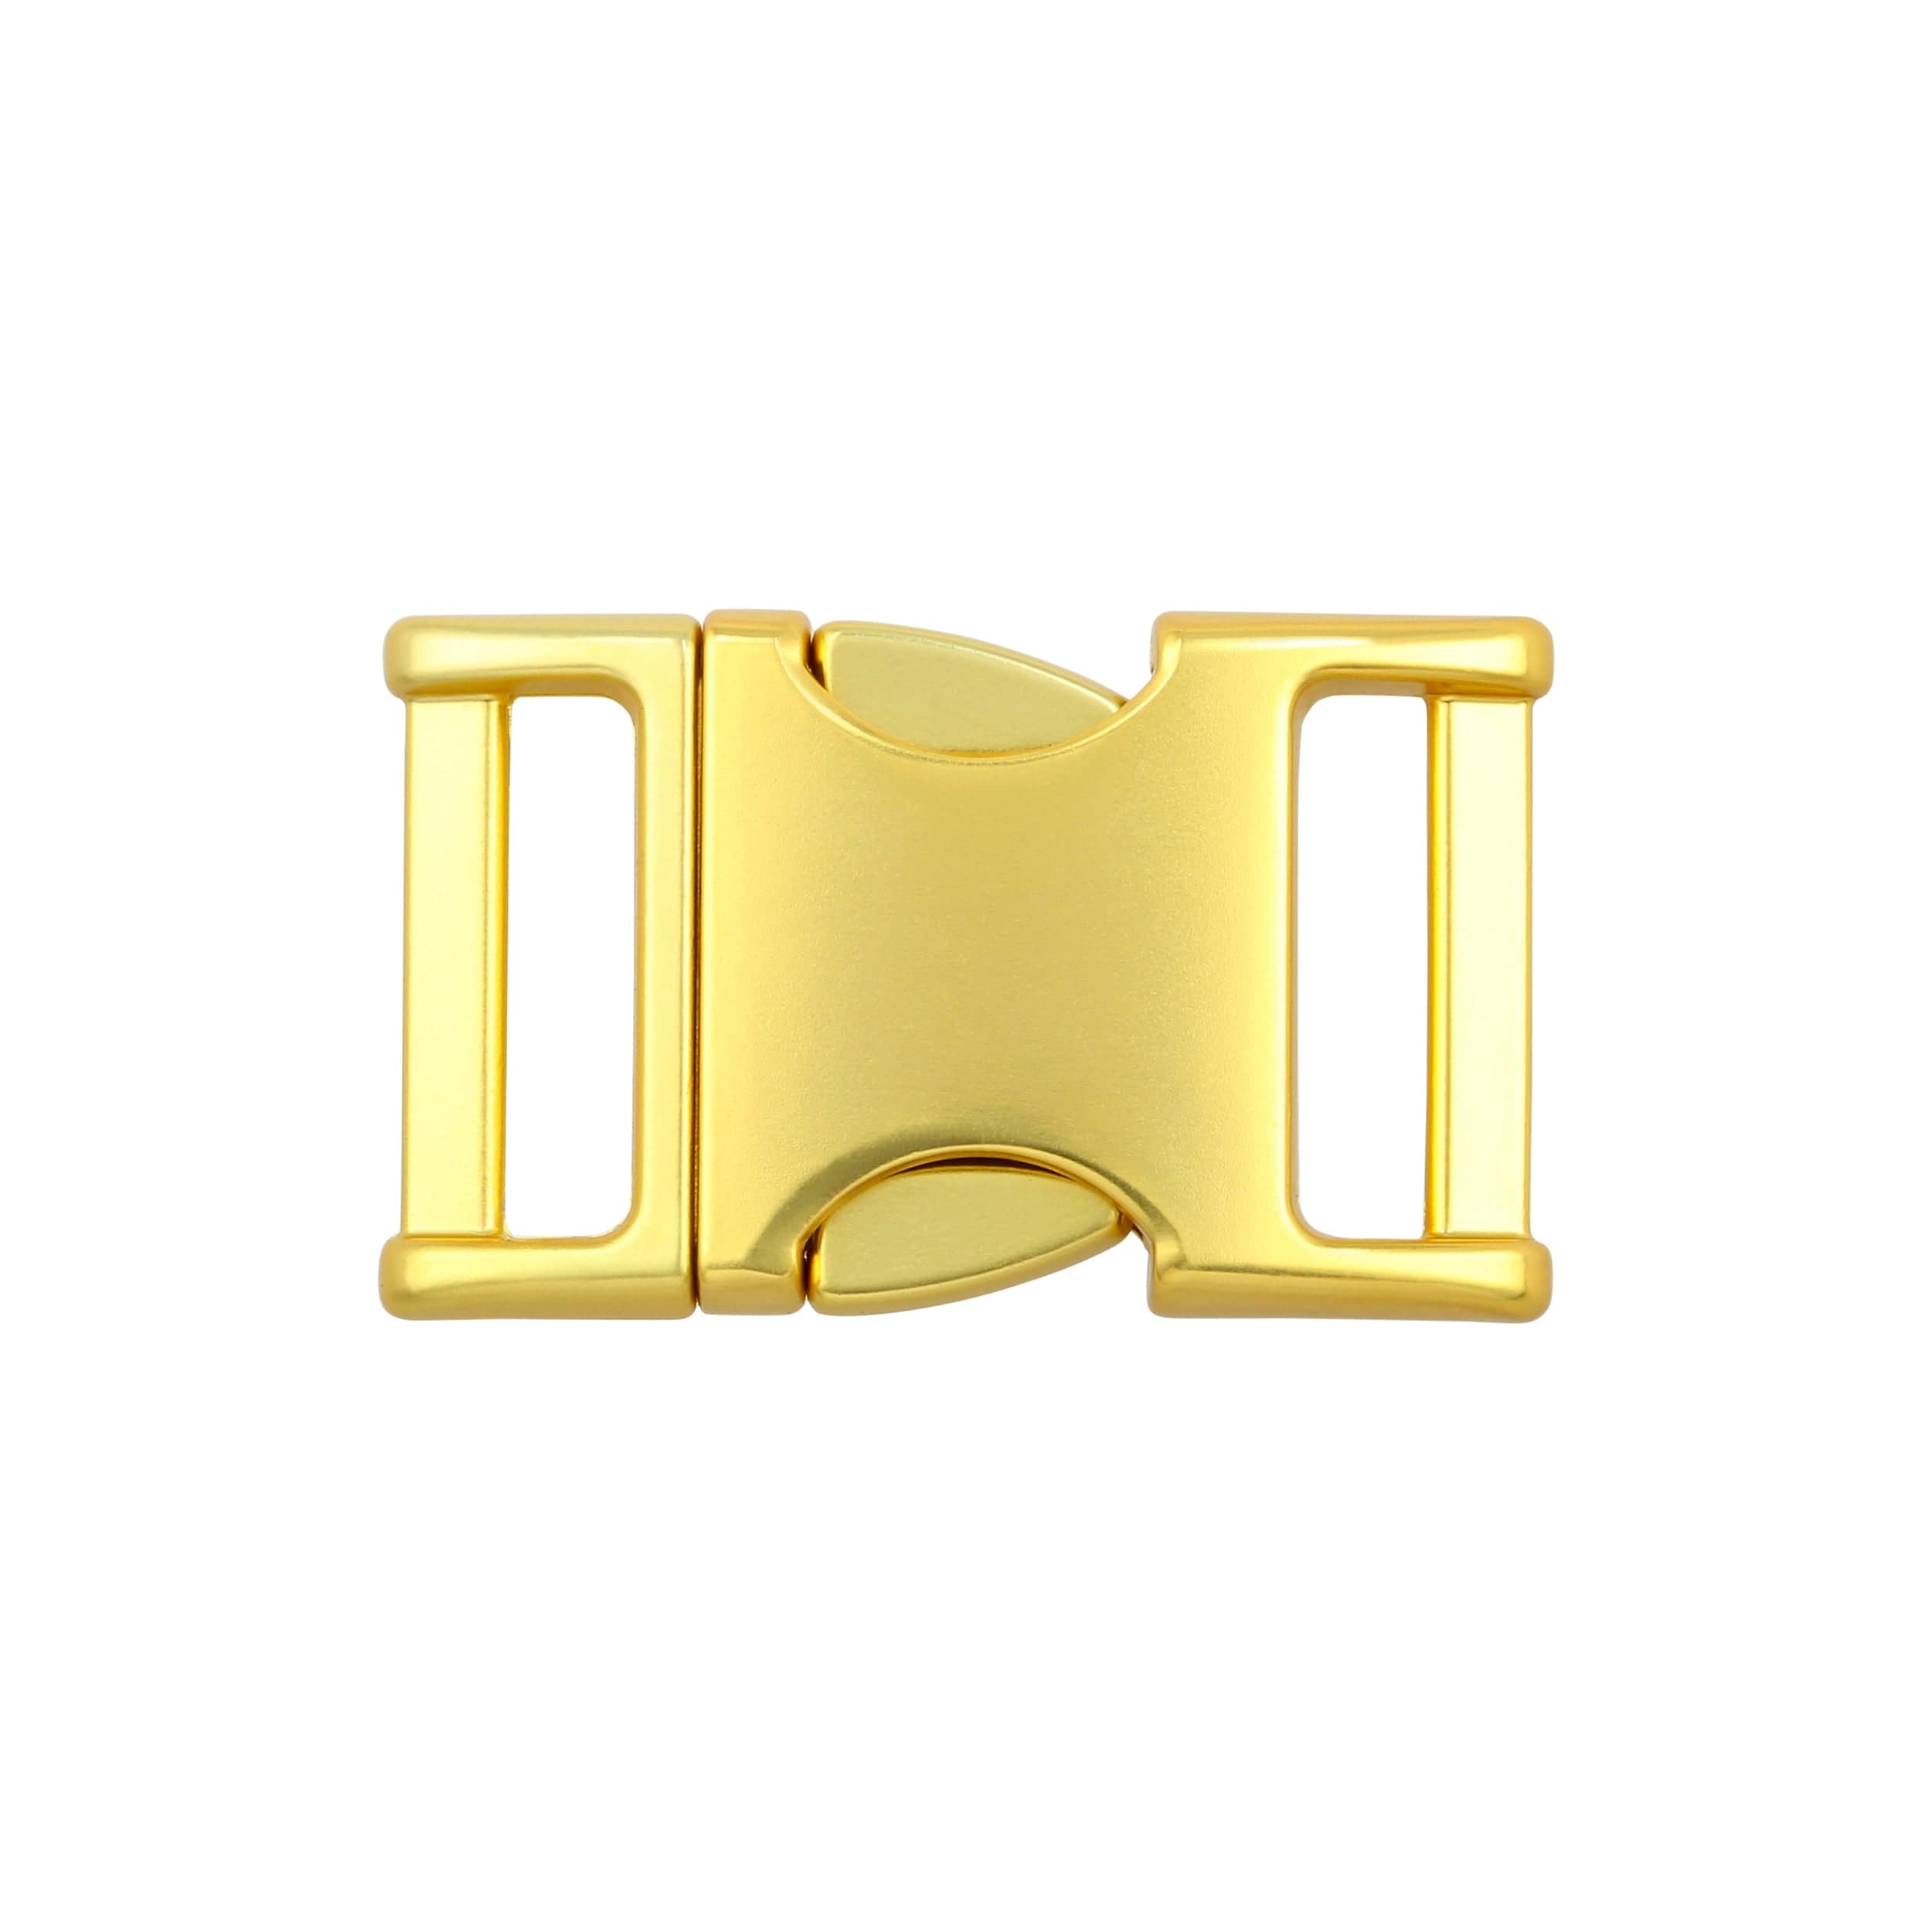 5/8 Inch Contoured Aluminum Side Release Buckles